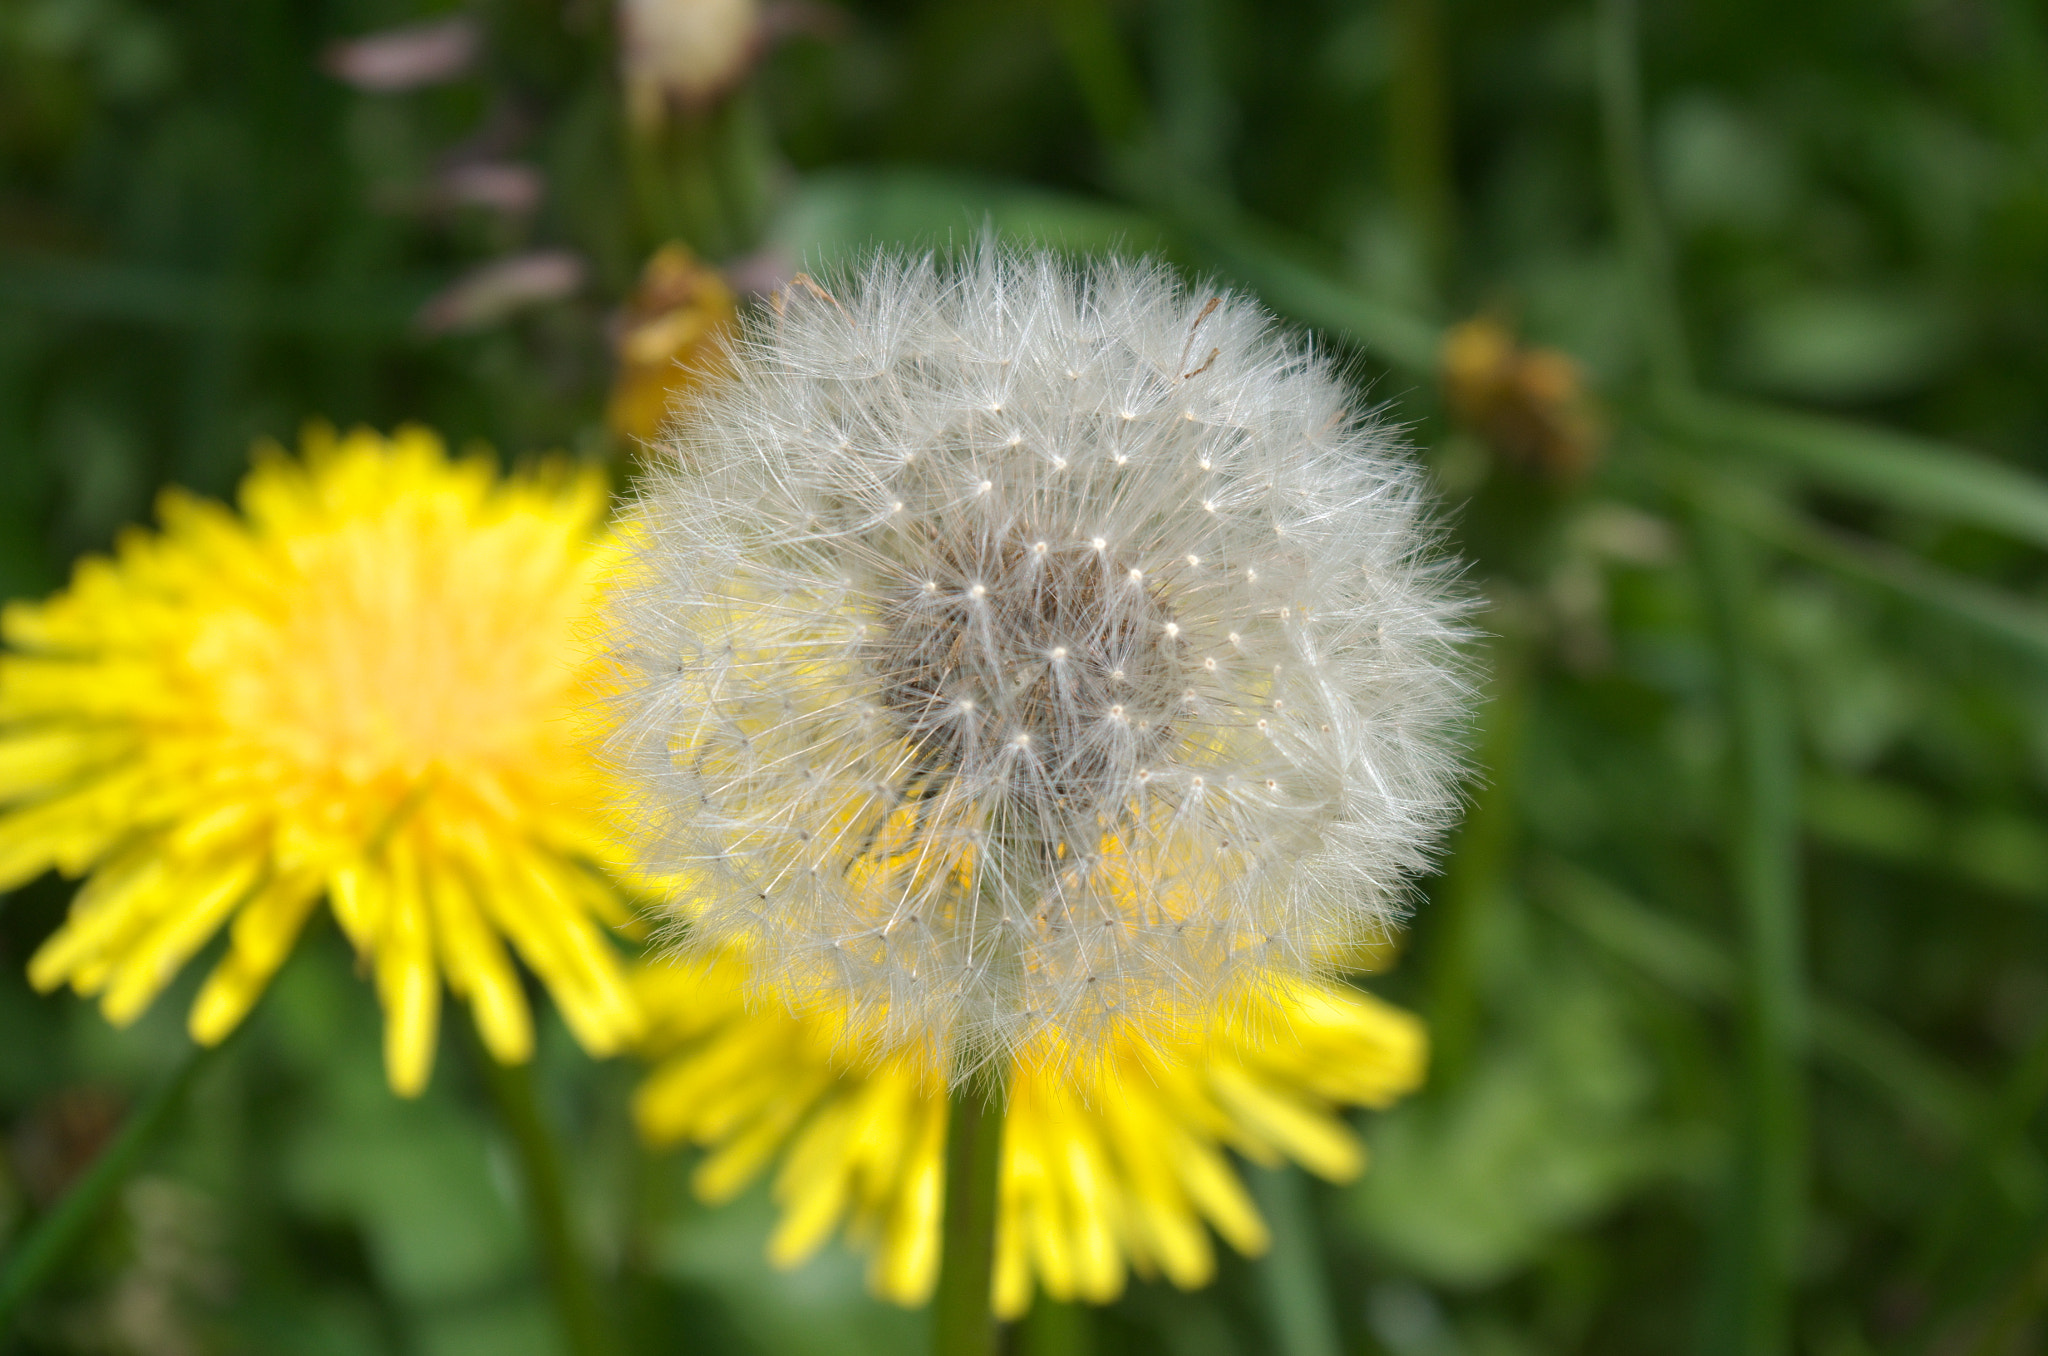 Pentax K-30 sample photo. Dandelion stages photography